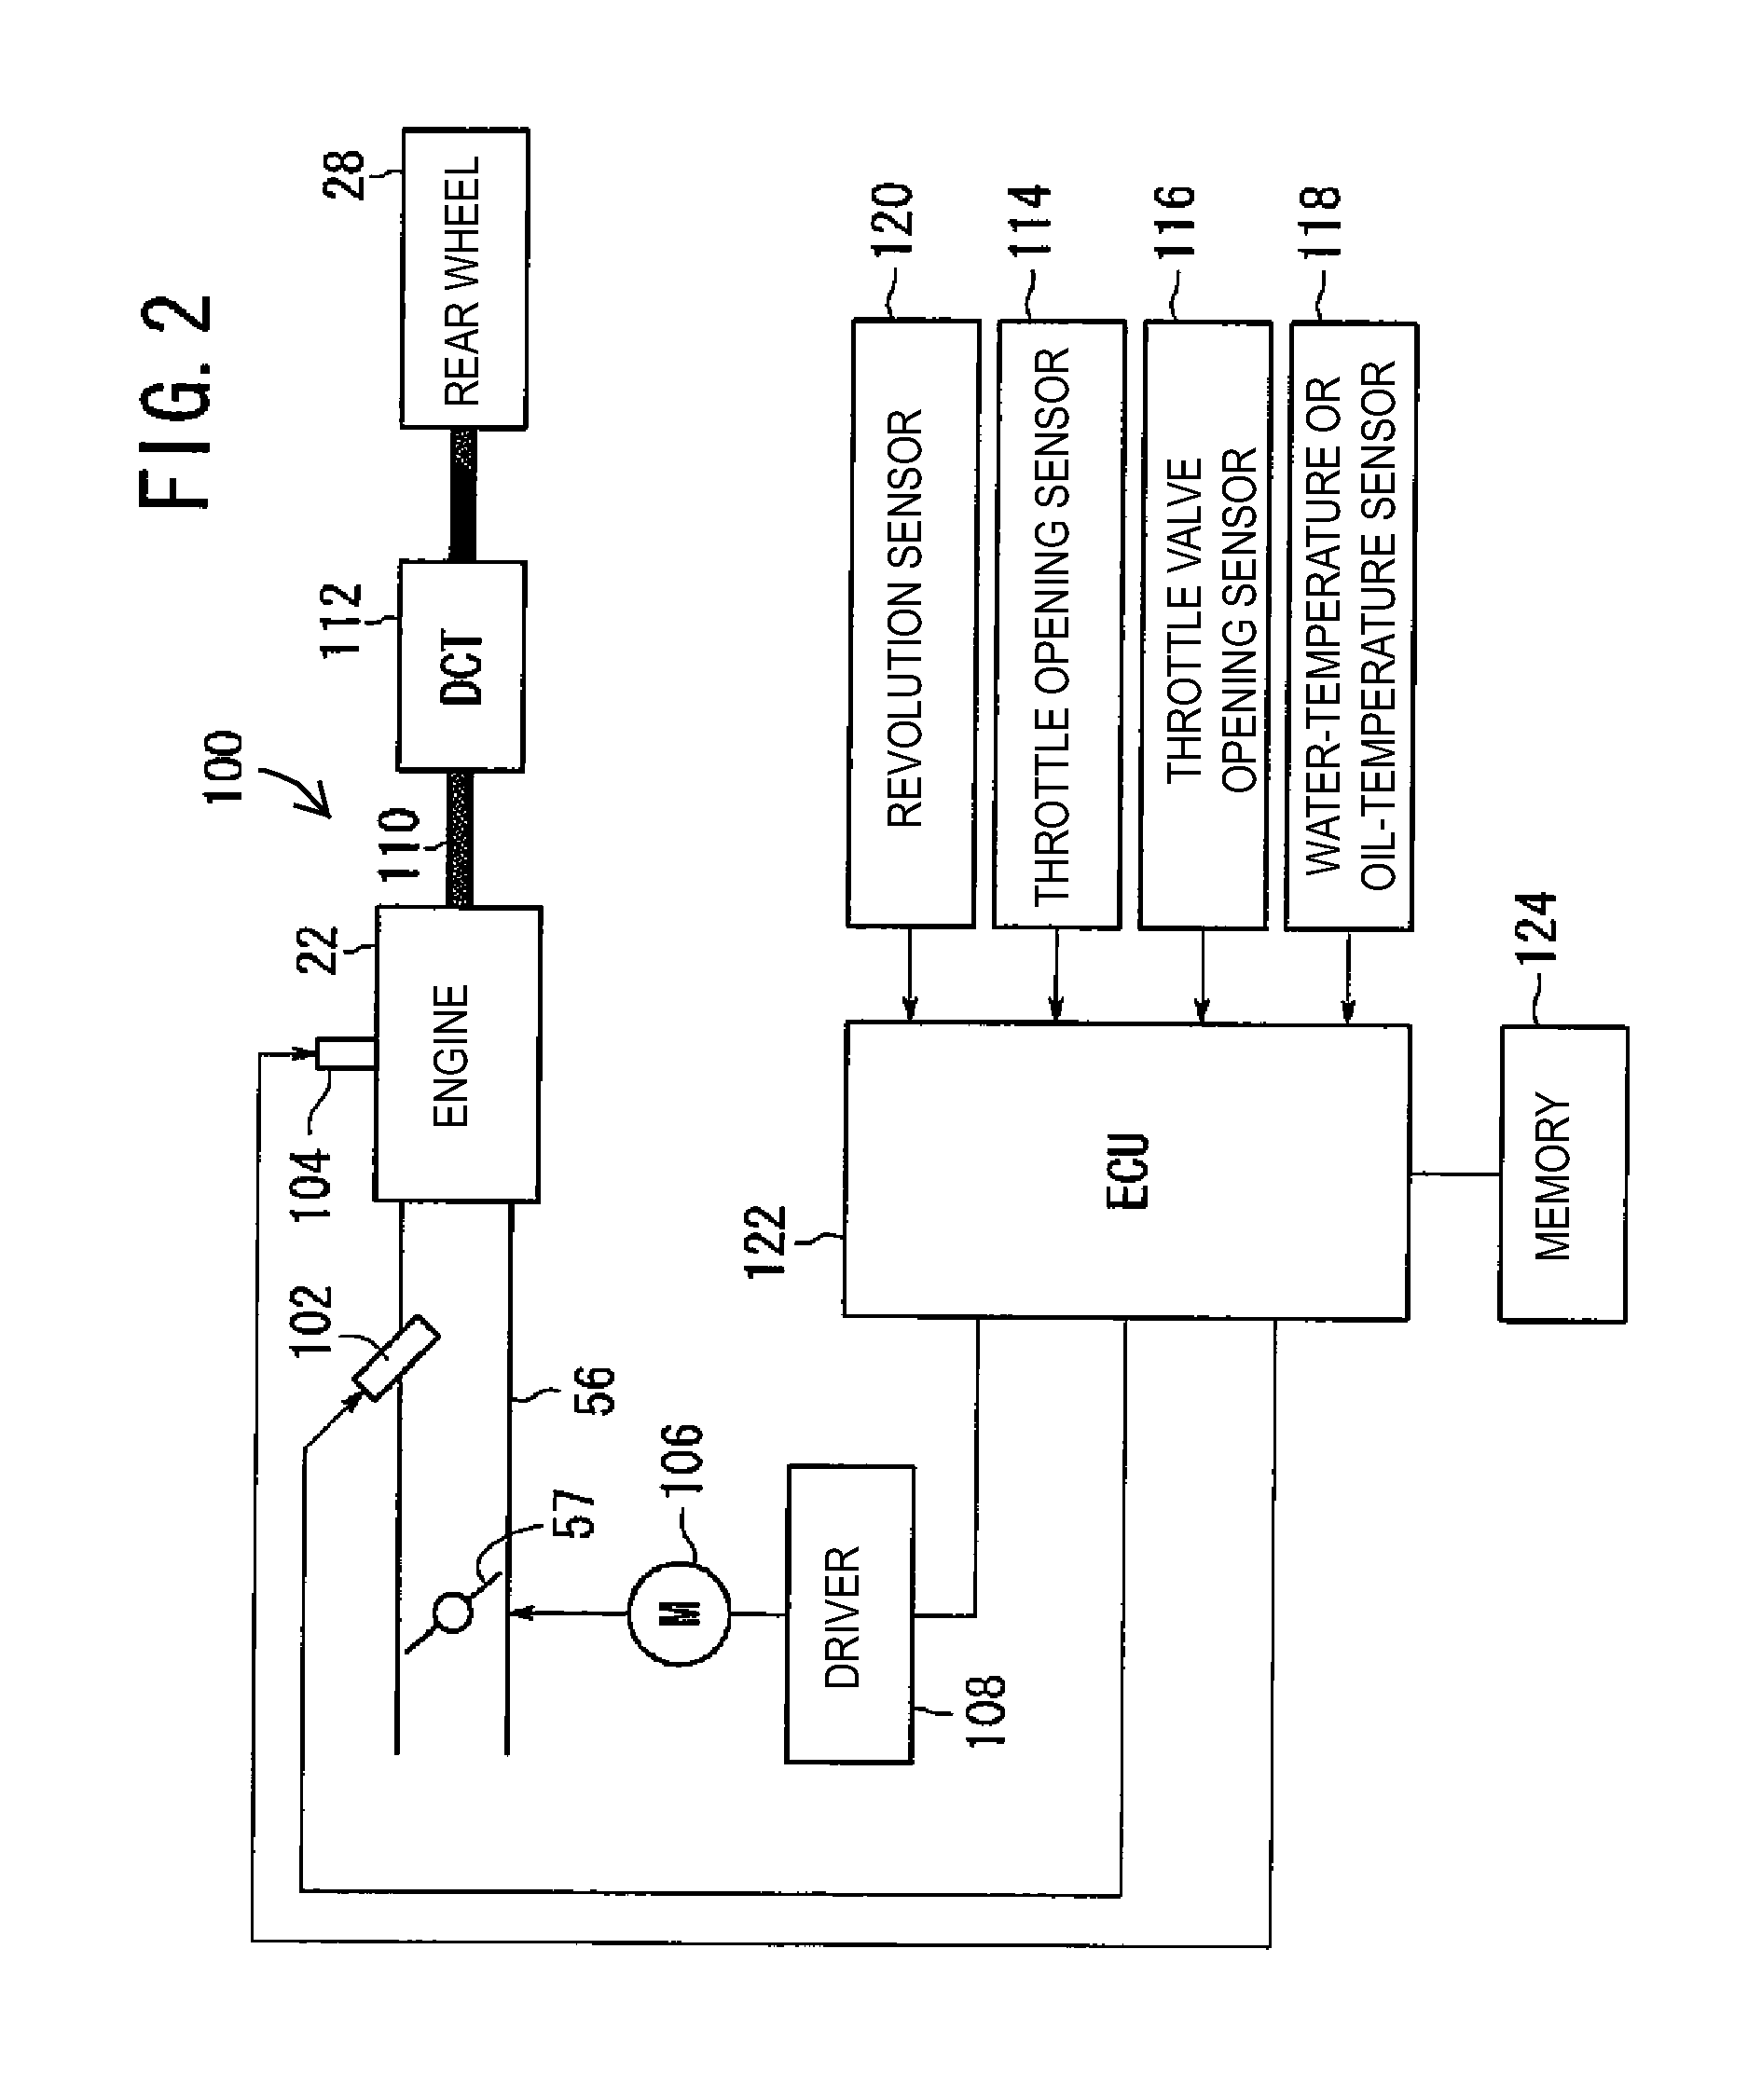 Engine control apparatus for a vehicle and vehicle incorporating same